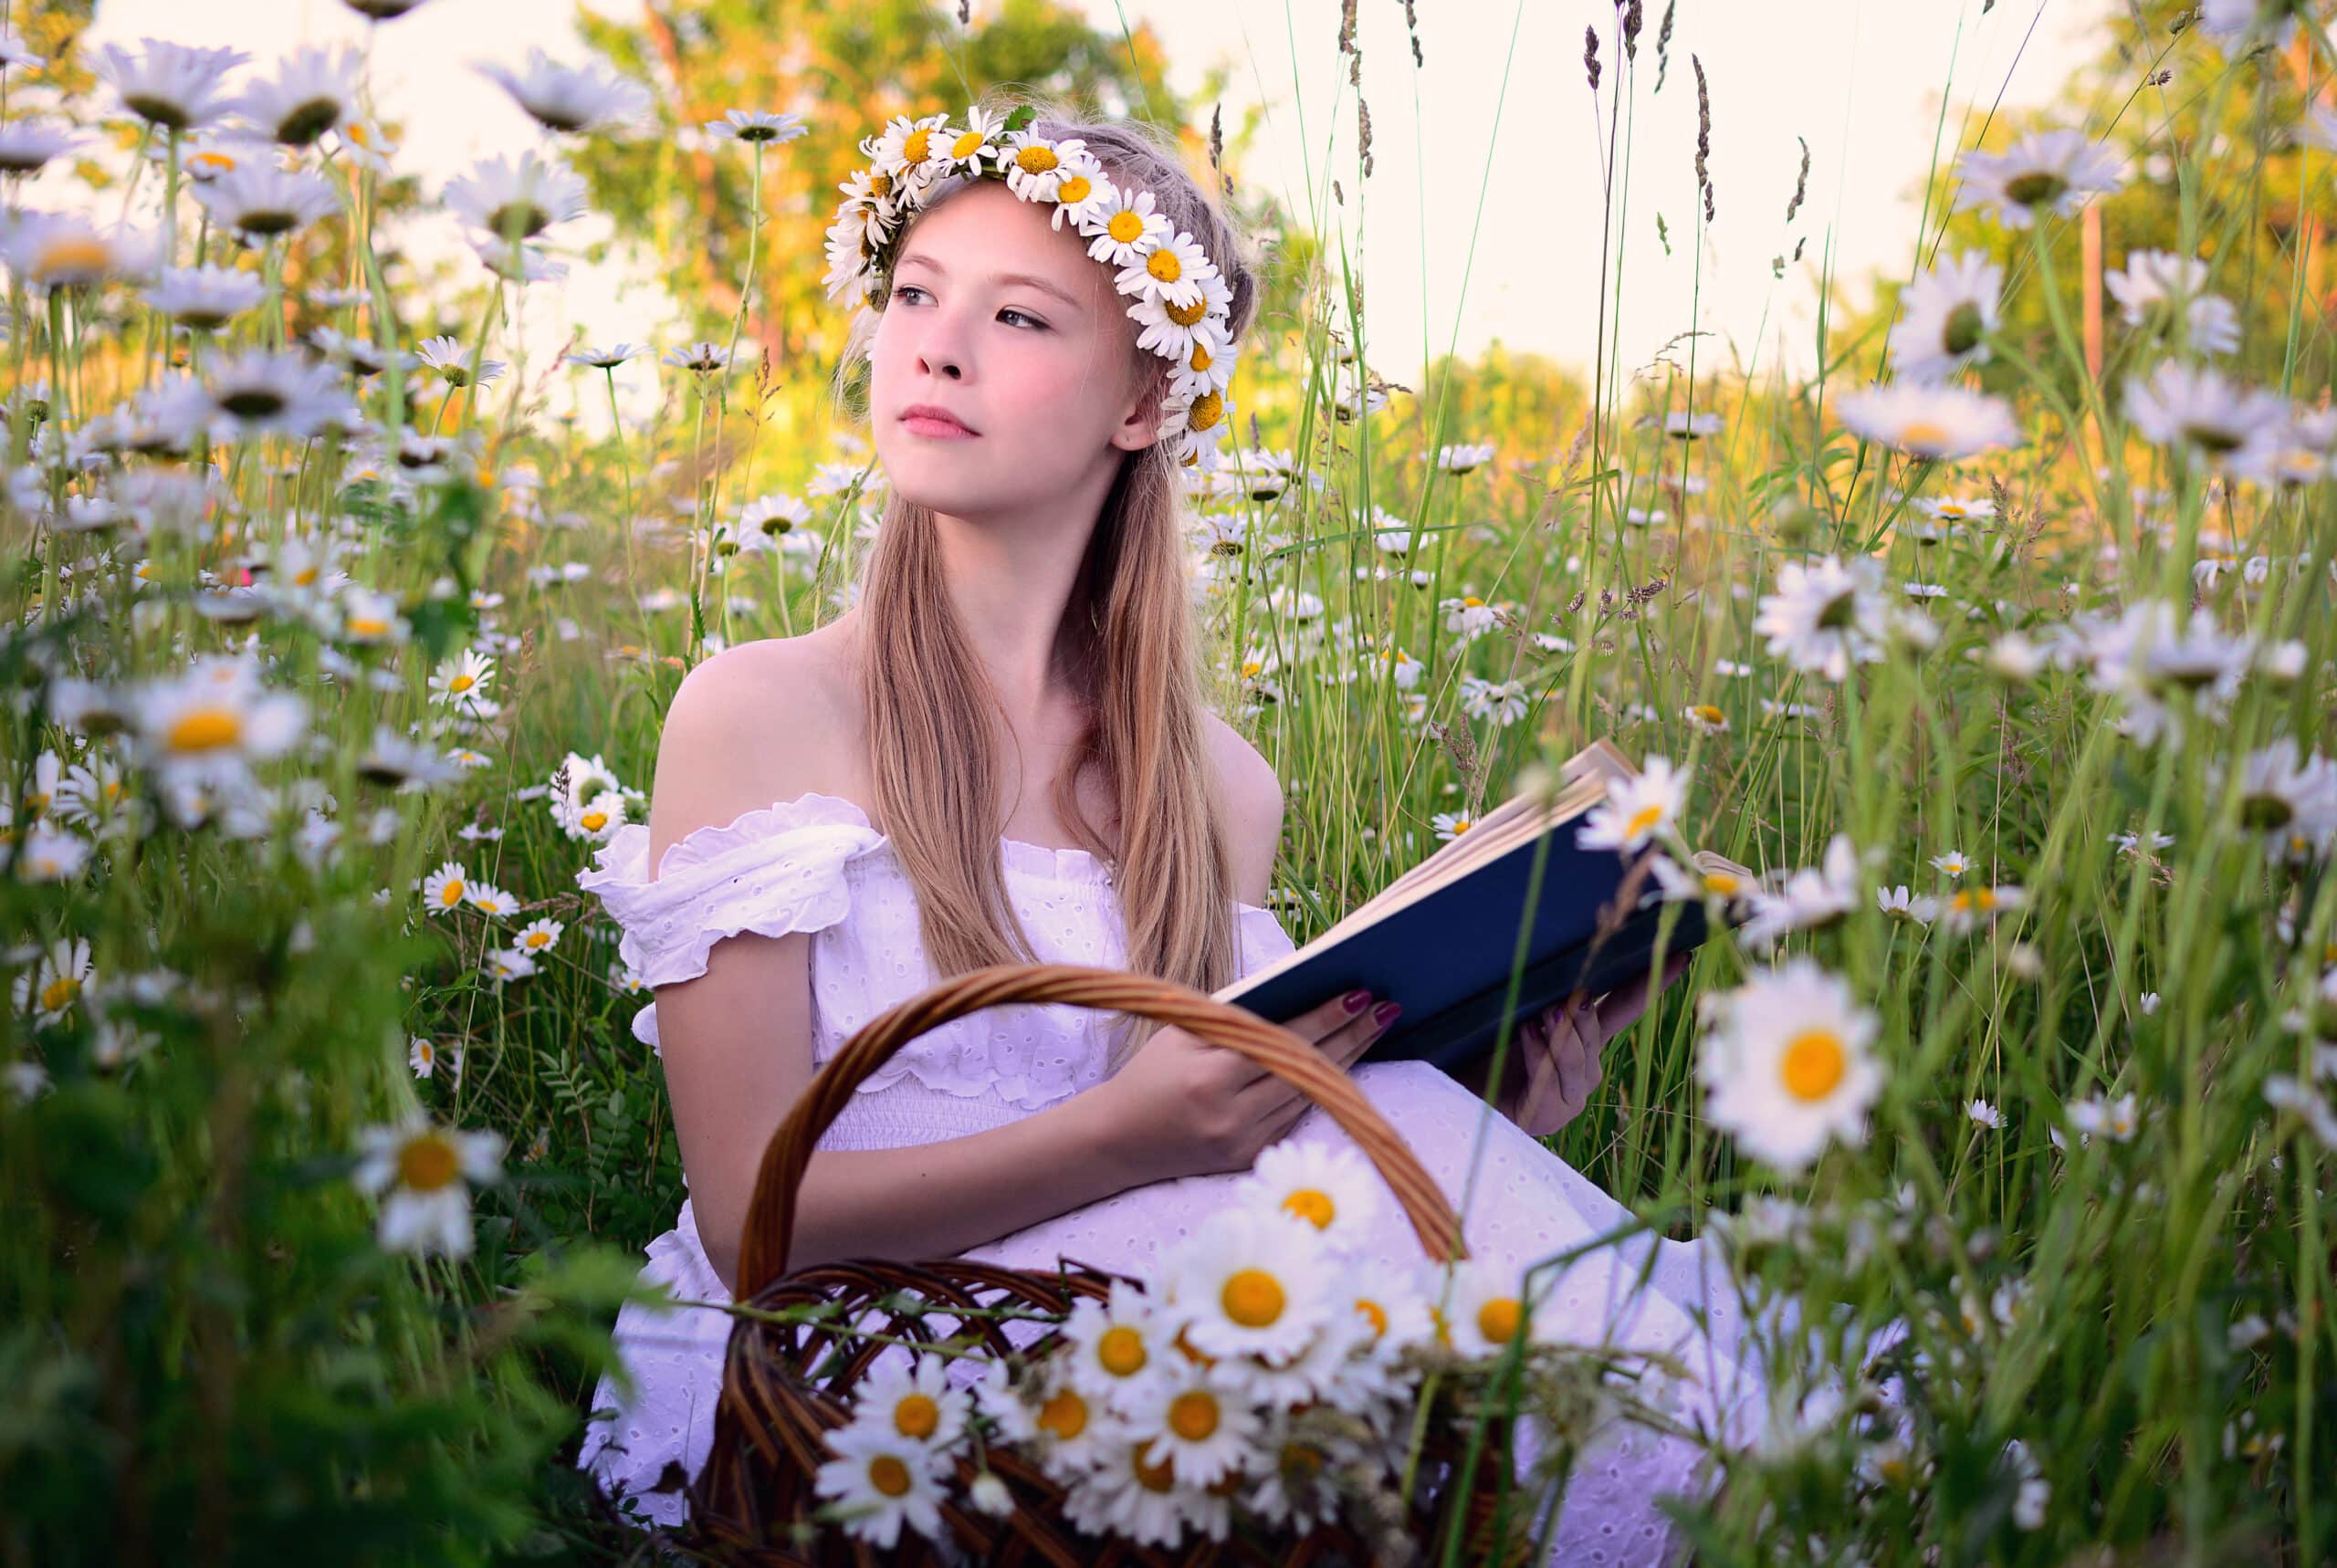 Young slim girl with a wreath on her head in a white dress sitting in a field of daisies with a book